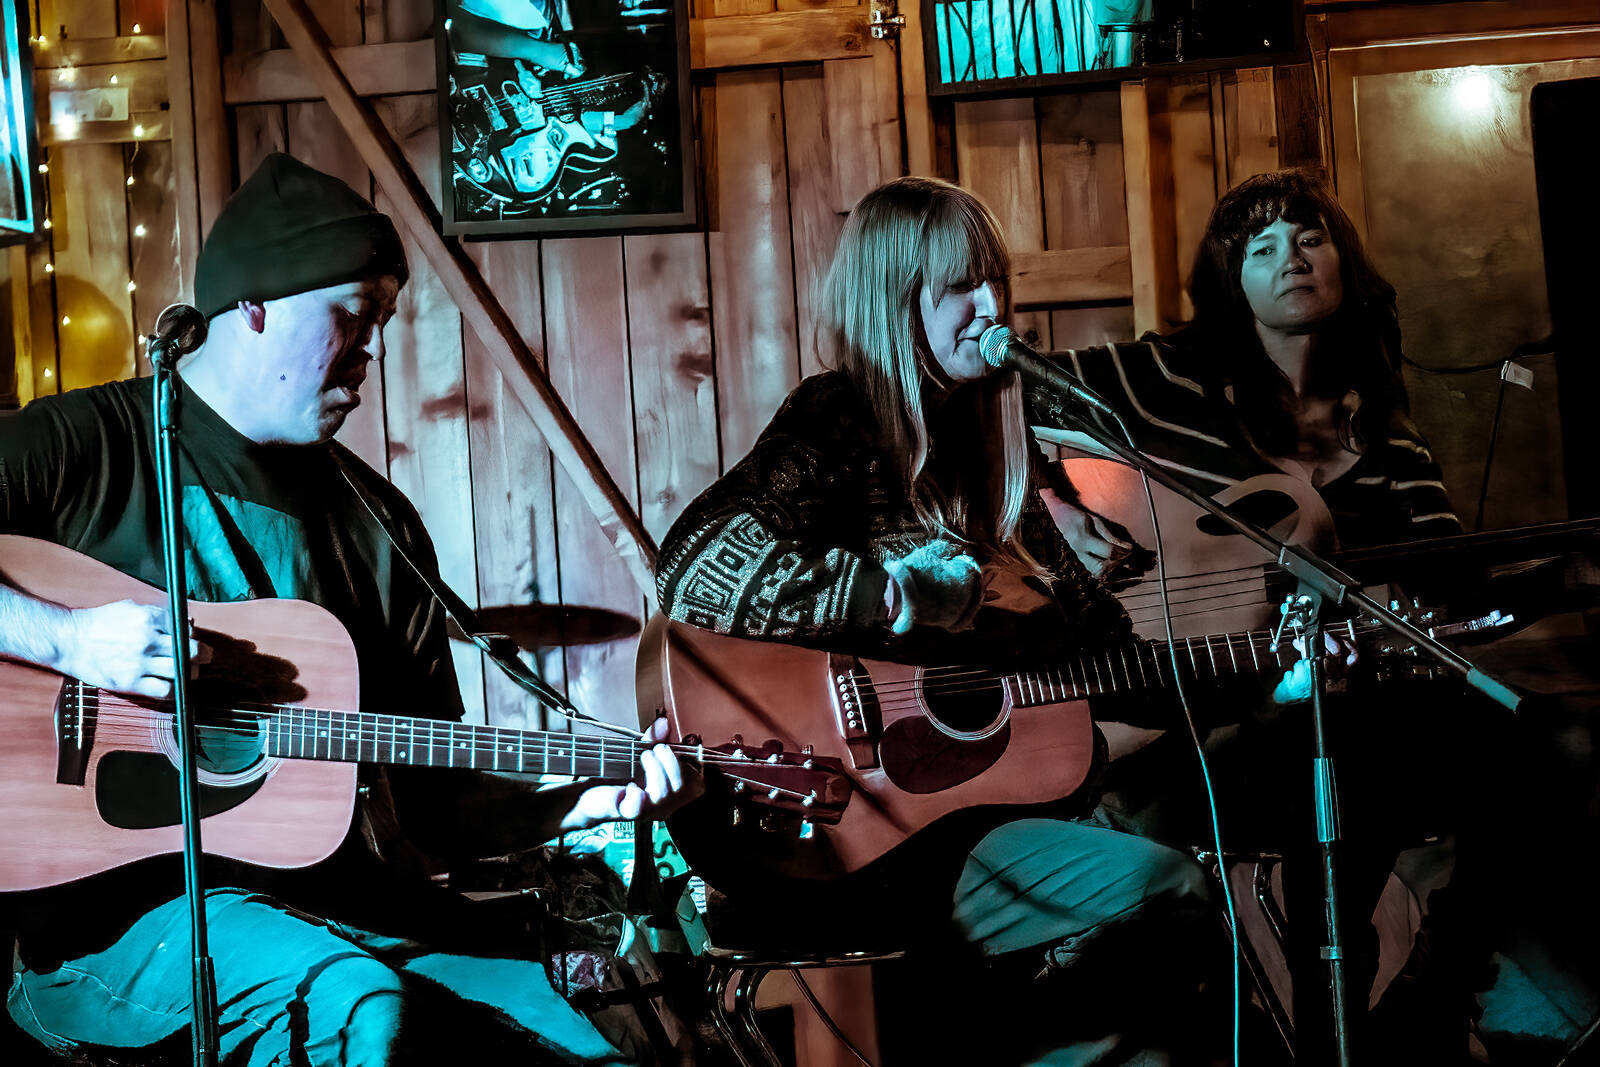 Photo by Dennis Browne
Buried Blonde performing an acoustic set at Bailey’s Nov. 12